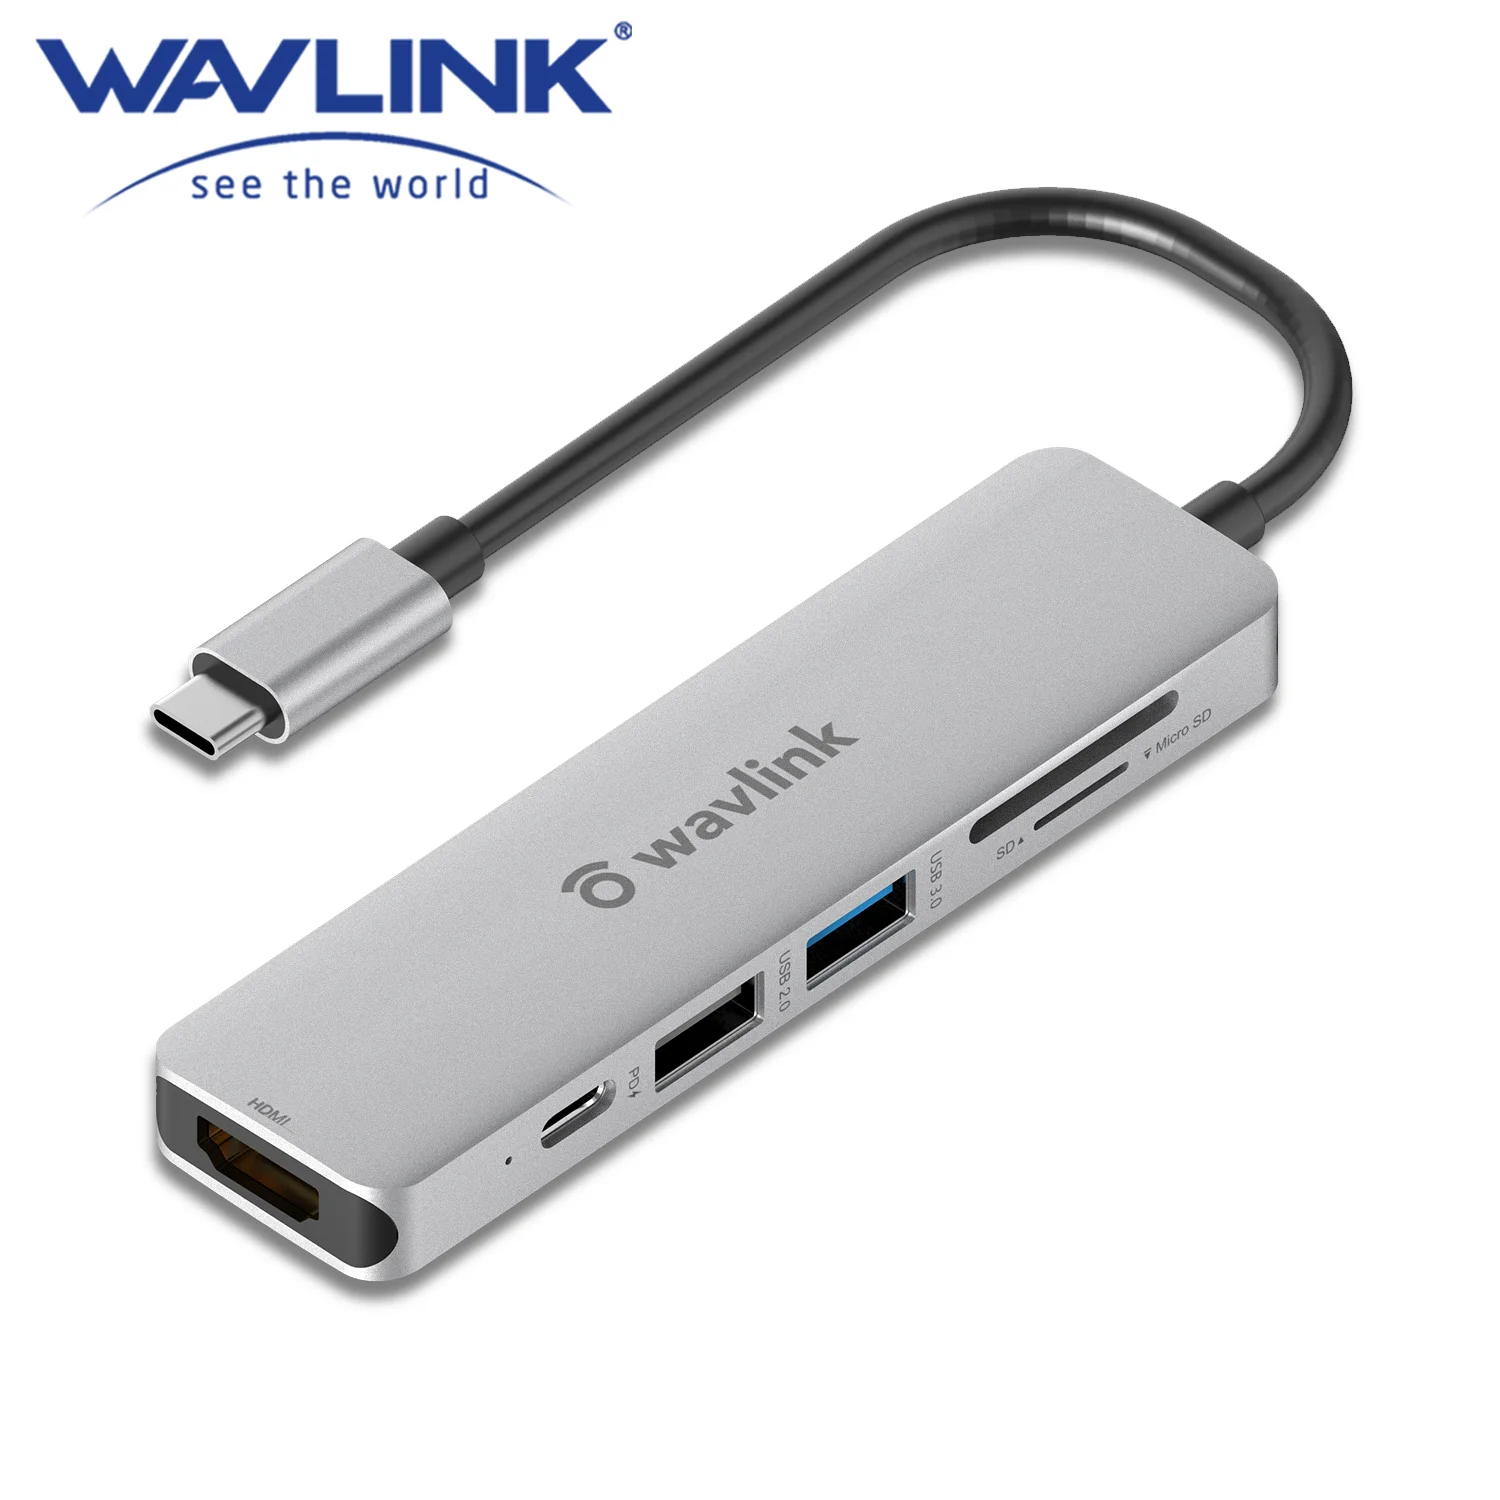 

Wavlink USB C Hub 7 IN 1 Laptop Accessories Adapter Docking Station With 87W Power Delivery 4K 30Hz HDMI-Port Mini Thunderbolt3